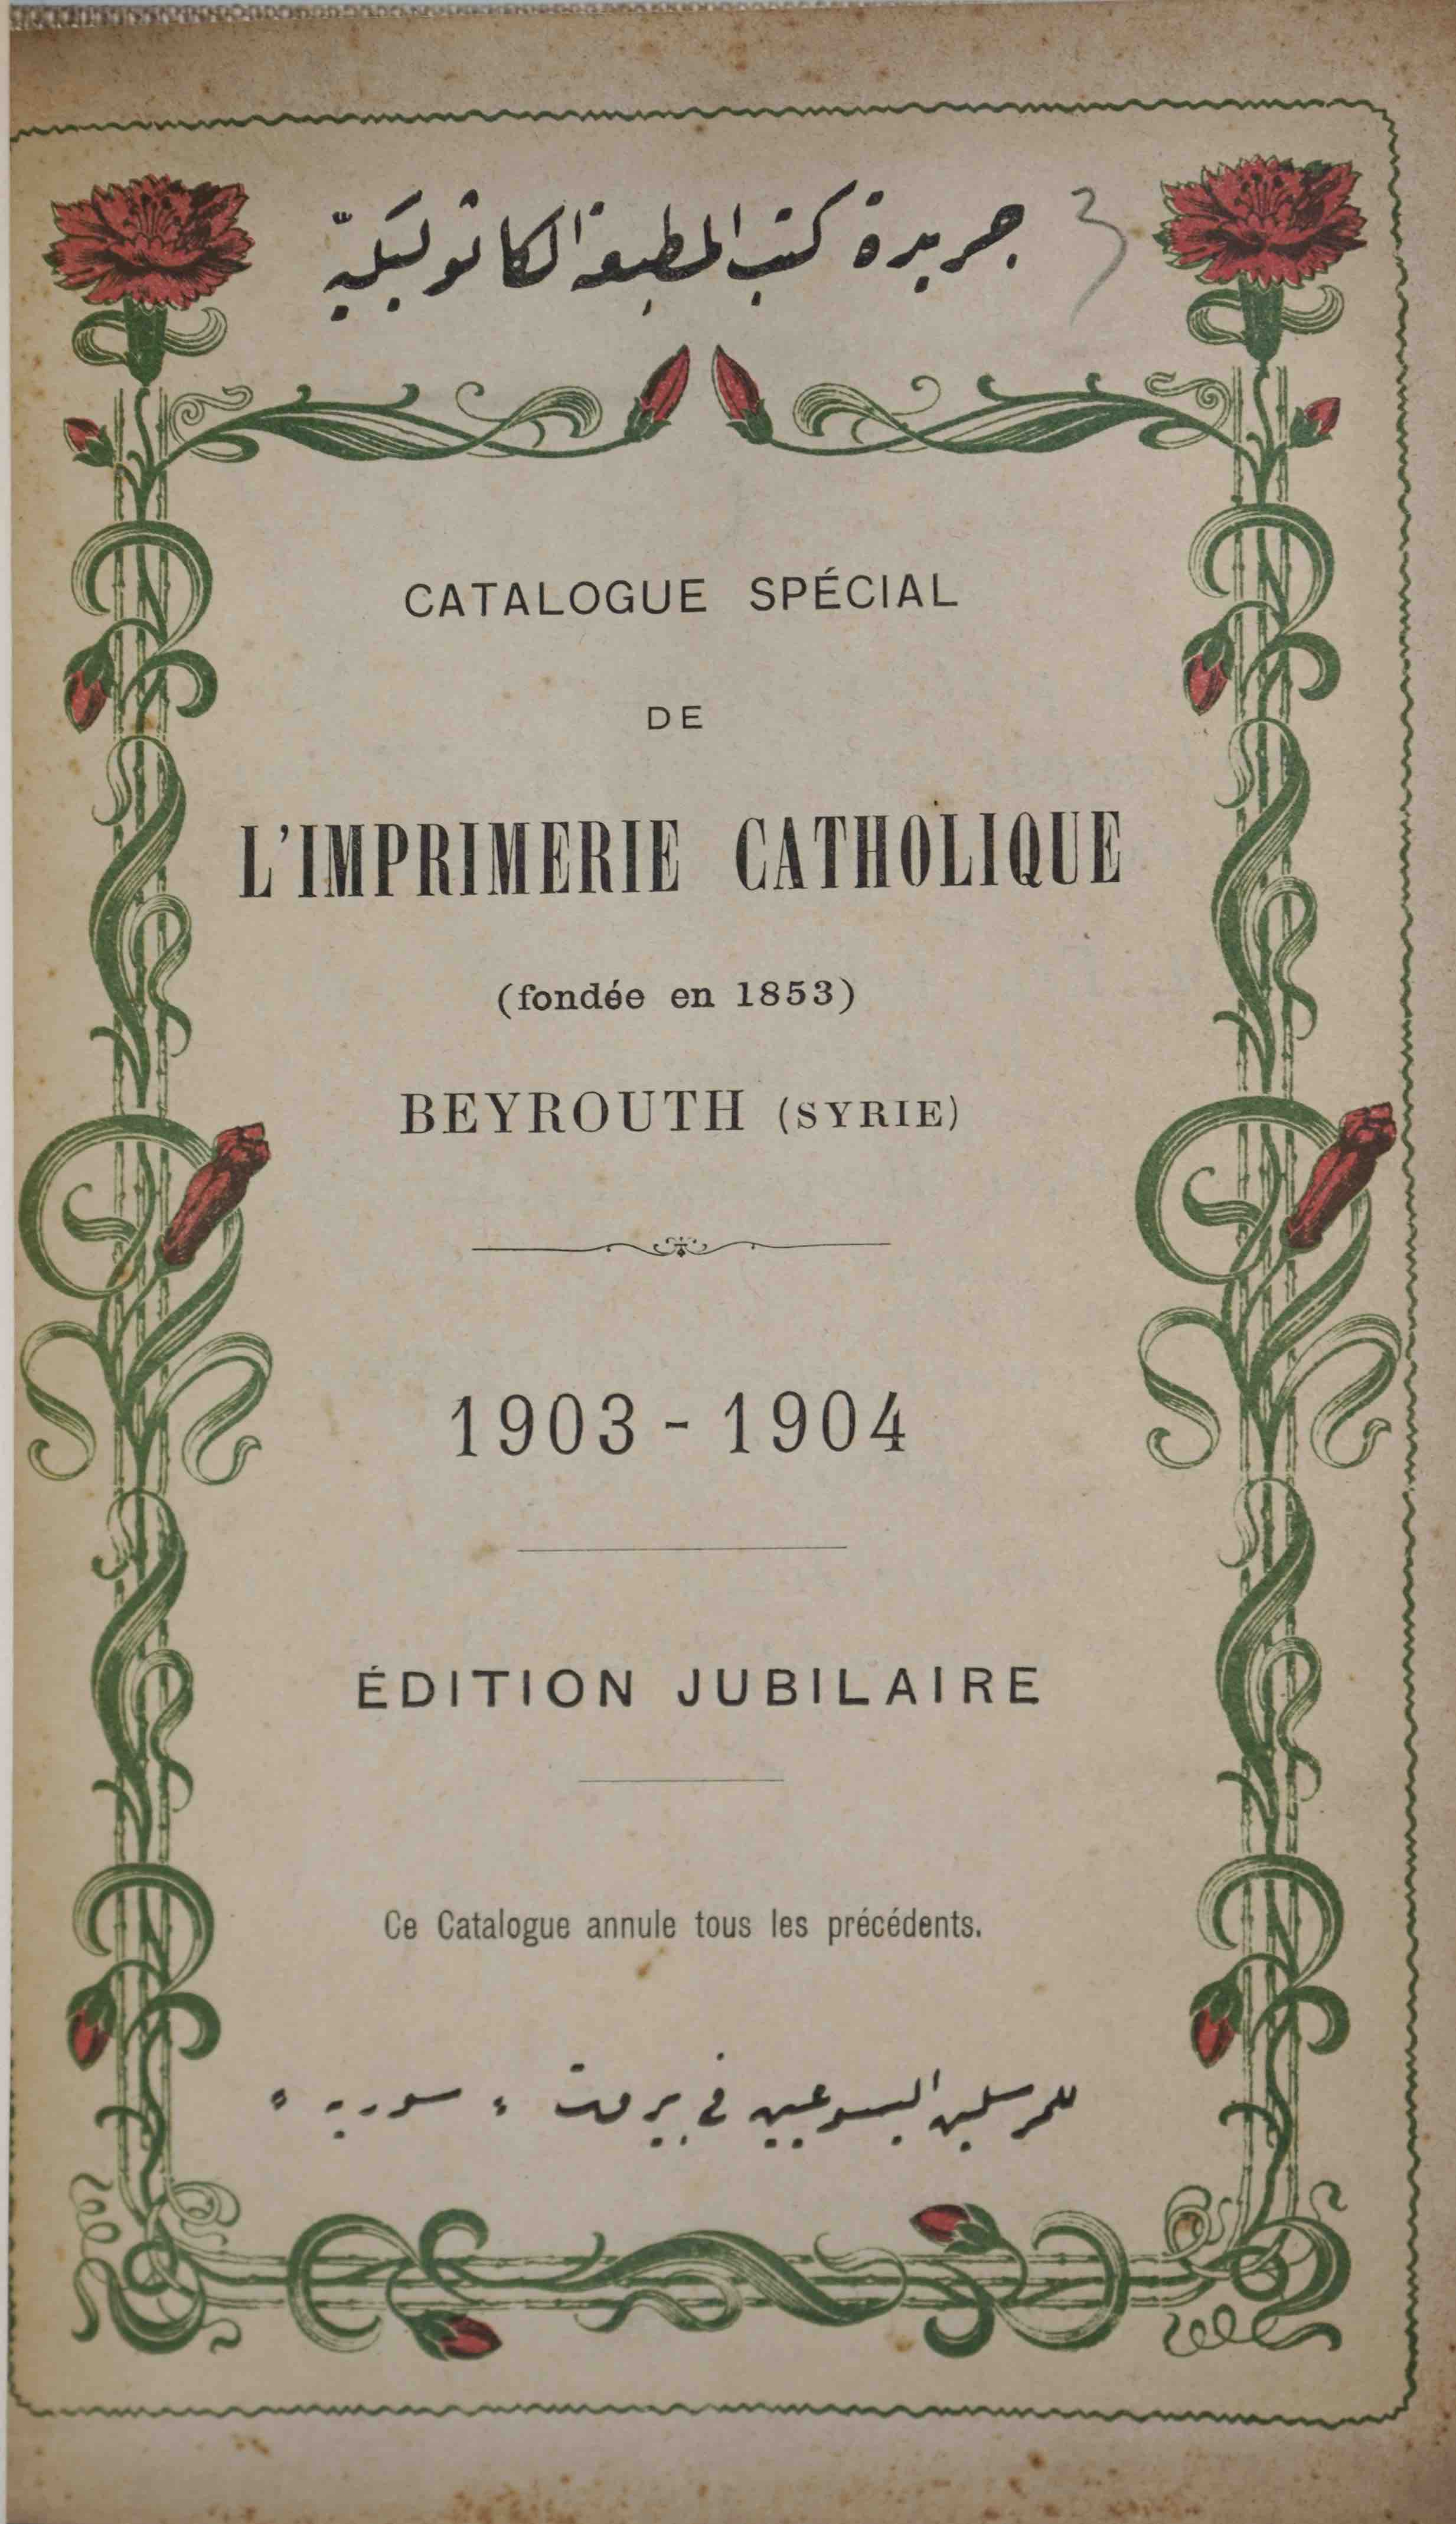 [CATHOLIC PRESS IN BEYROUTH] - Three catalogues with works printed at the Catholic Mission Press. Bound together in one volume. Beyrouth, 1878, 1888 and 1904.